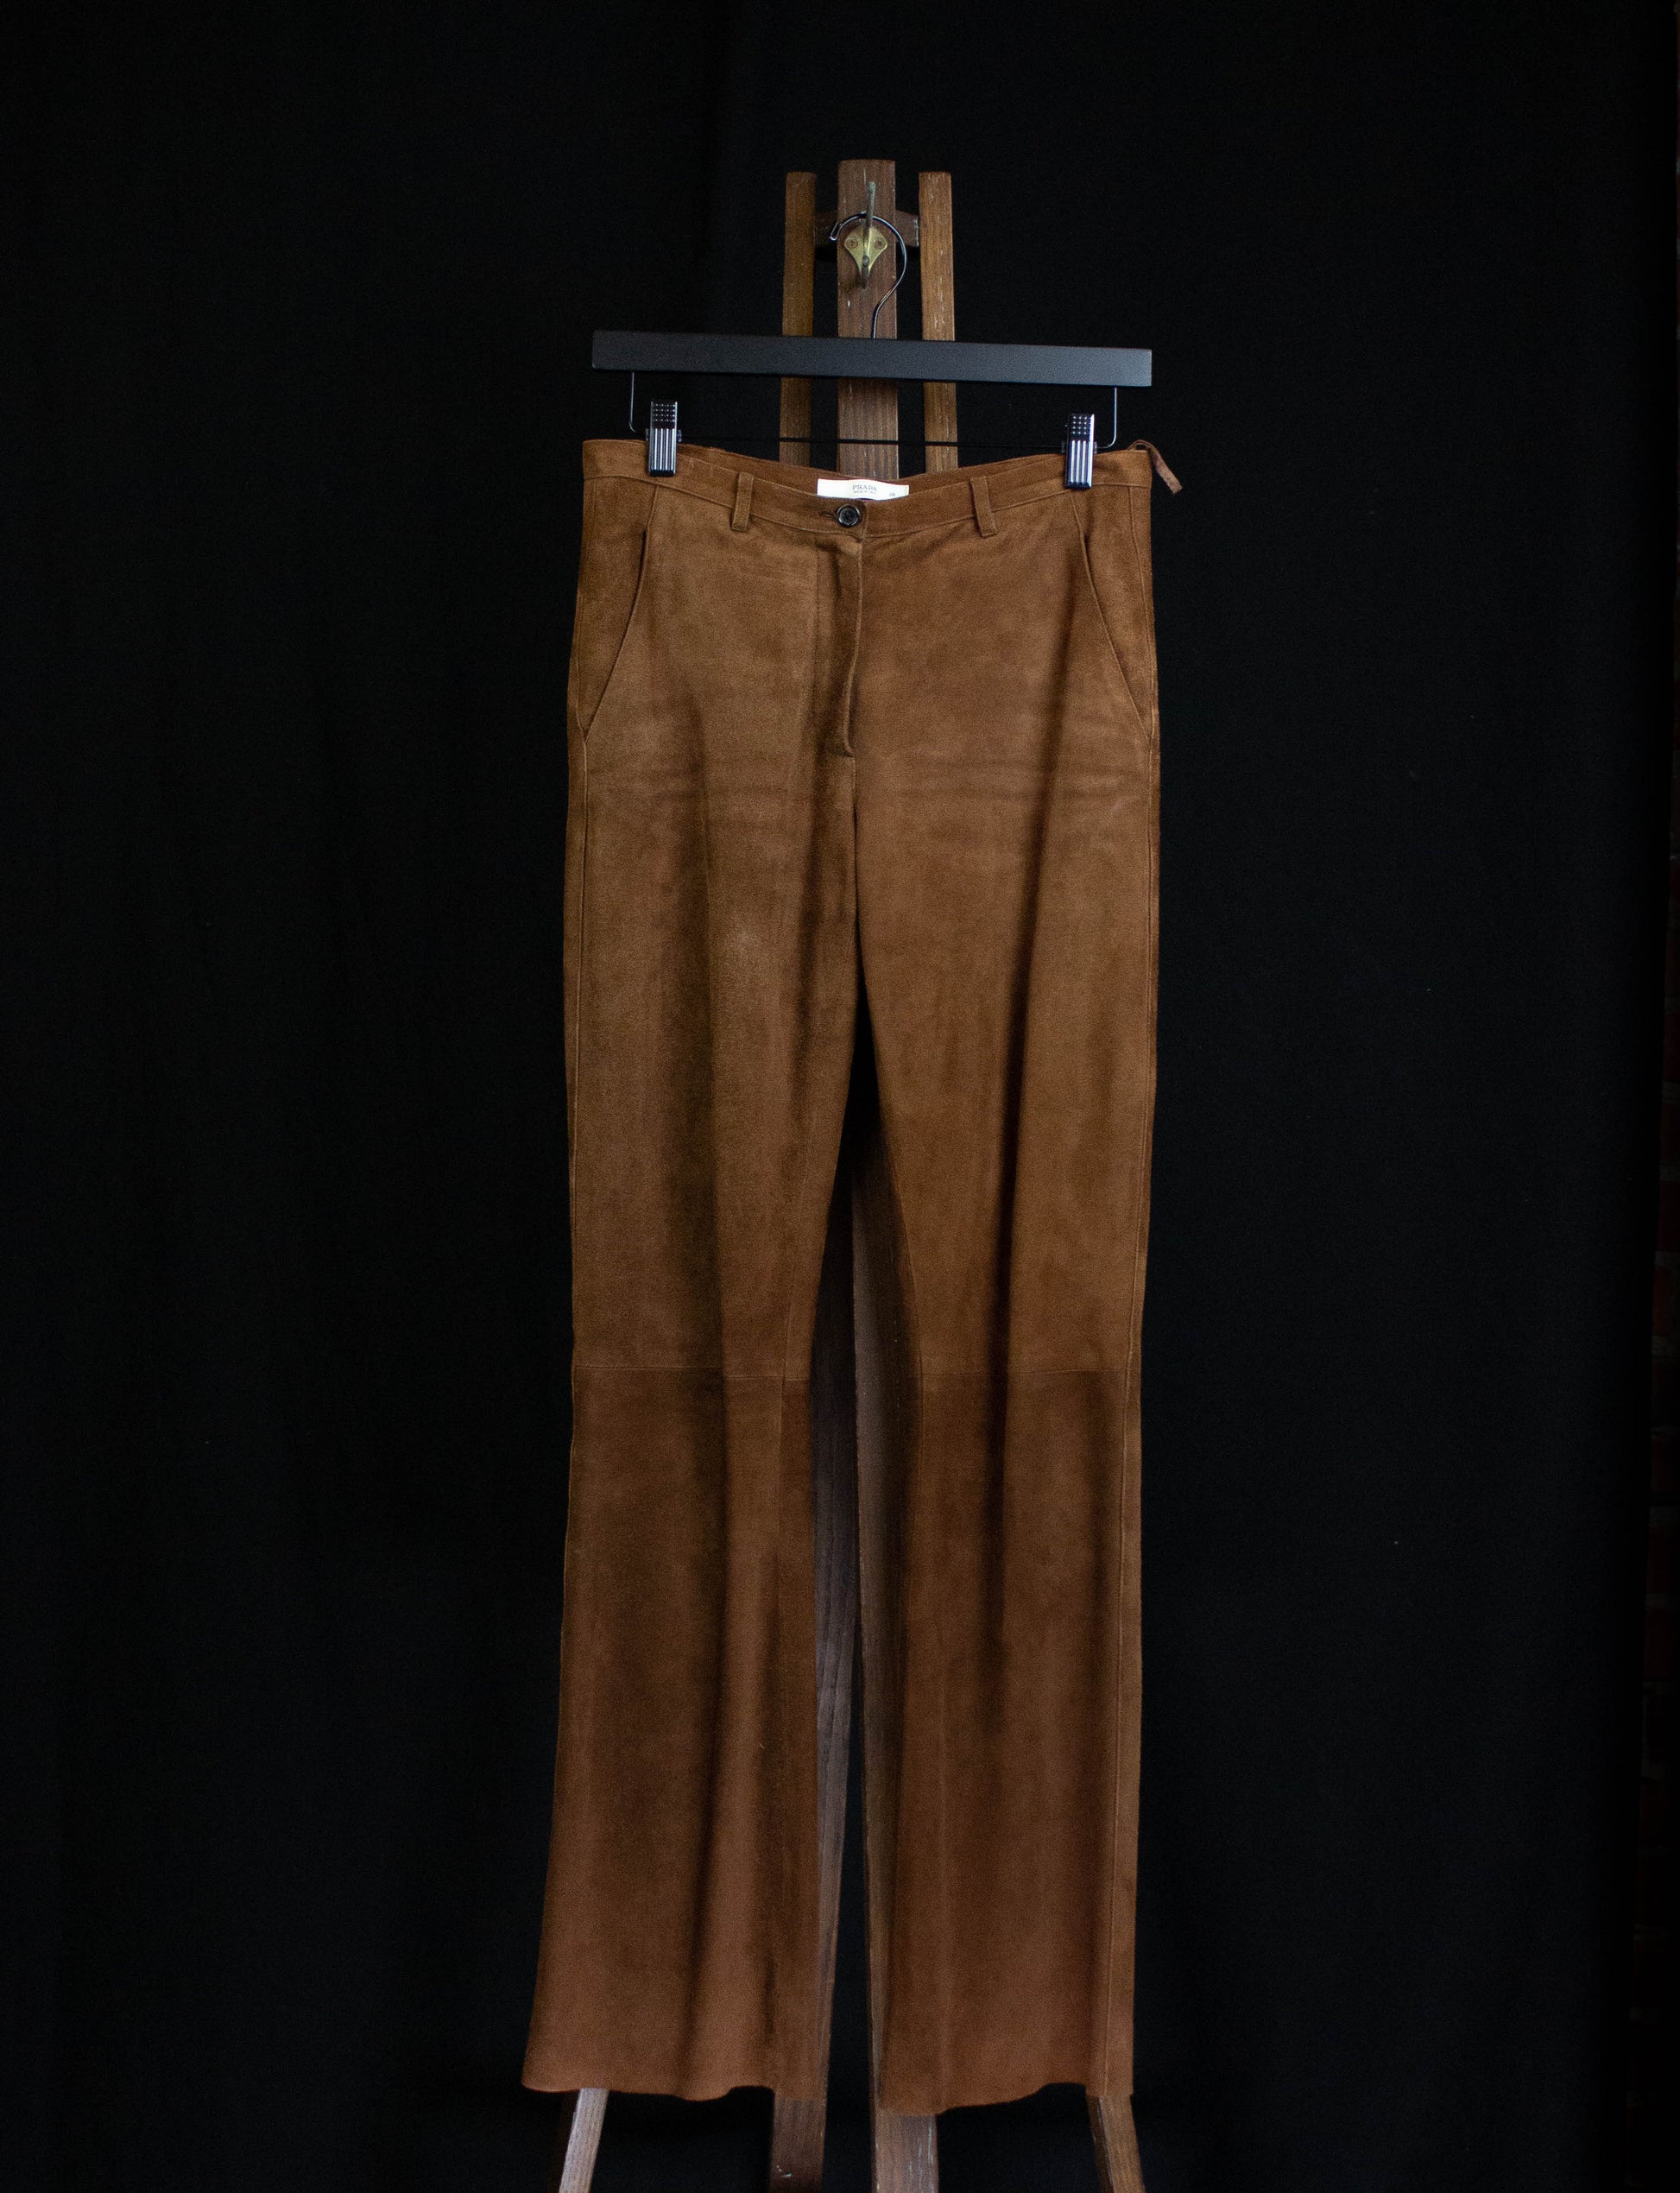 Prada Brown Suede Leather Flared Pants 27w